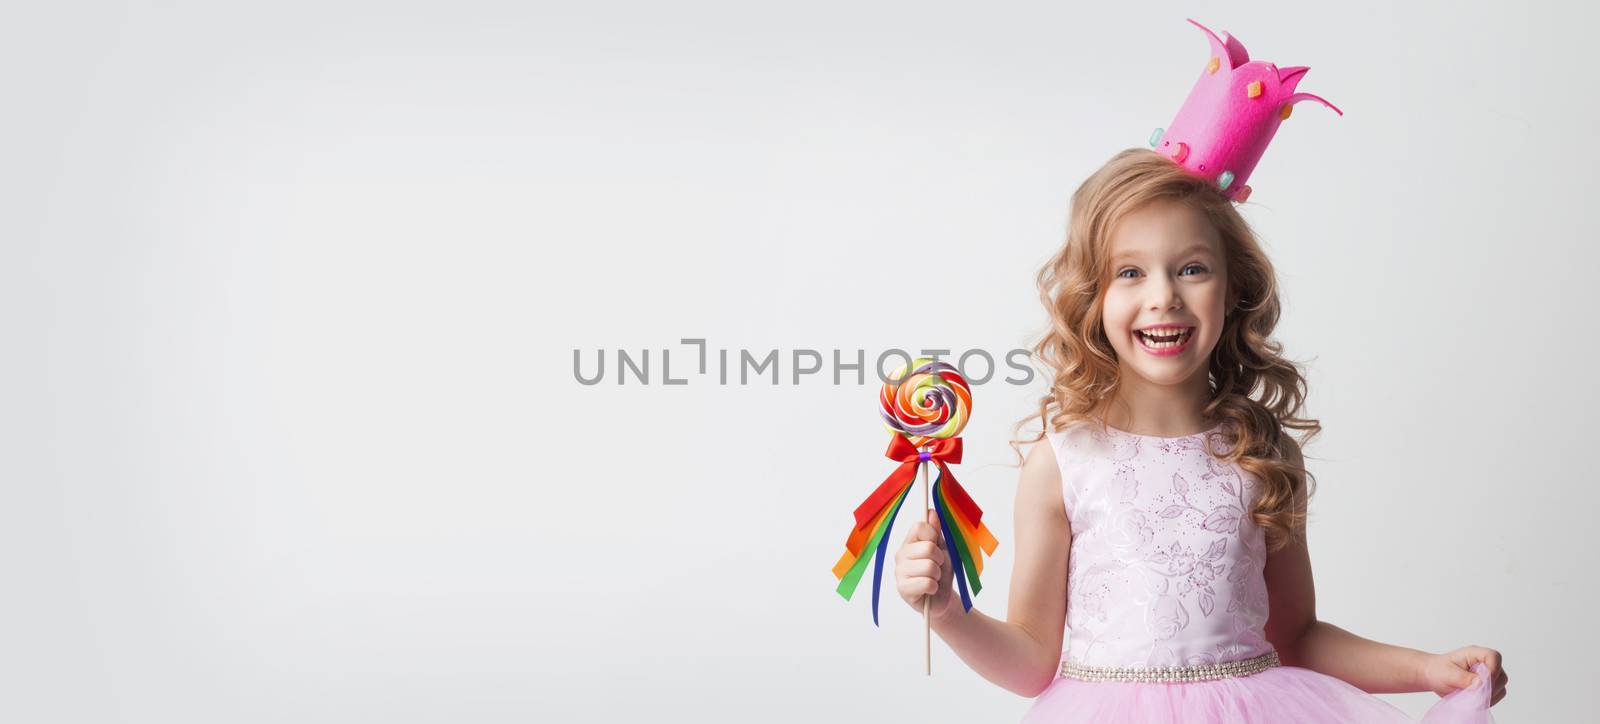 Small princess girl in crown holds a large spiral decorated lollipop candy